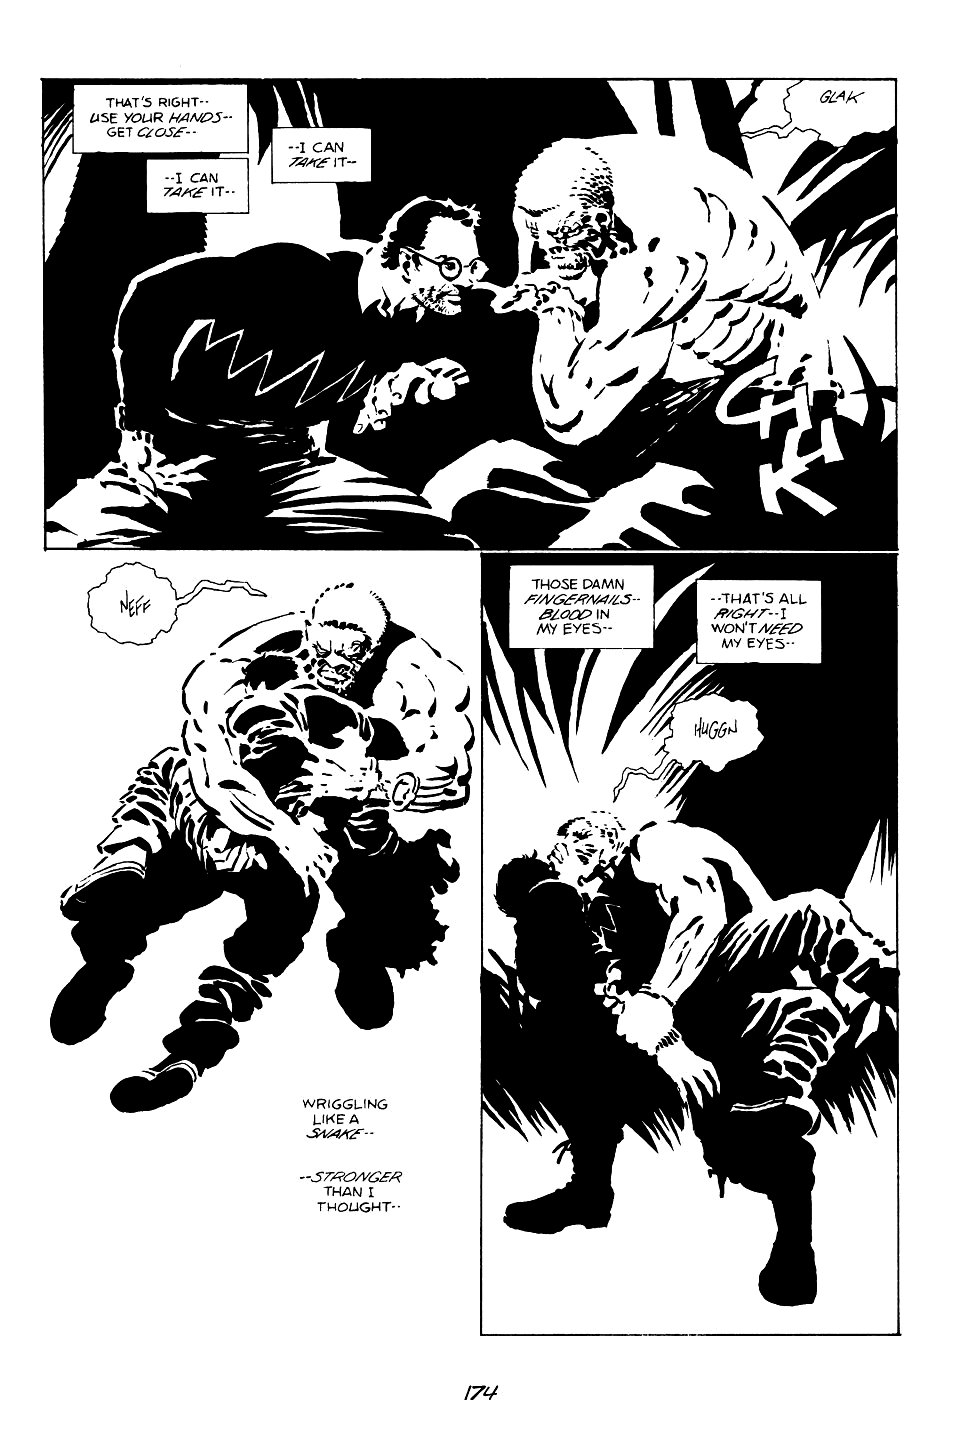 page 174 of sin city 1 the hard goodbye